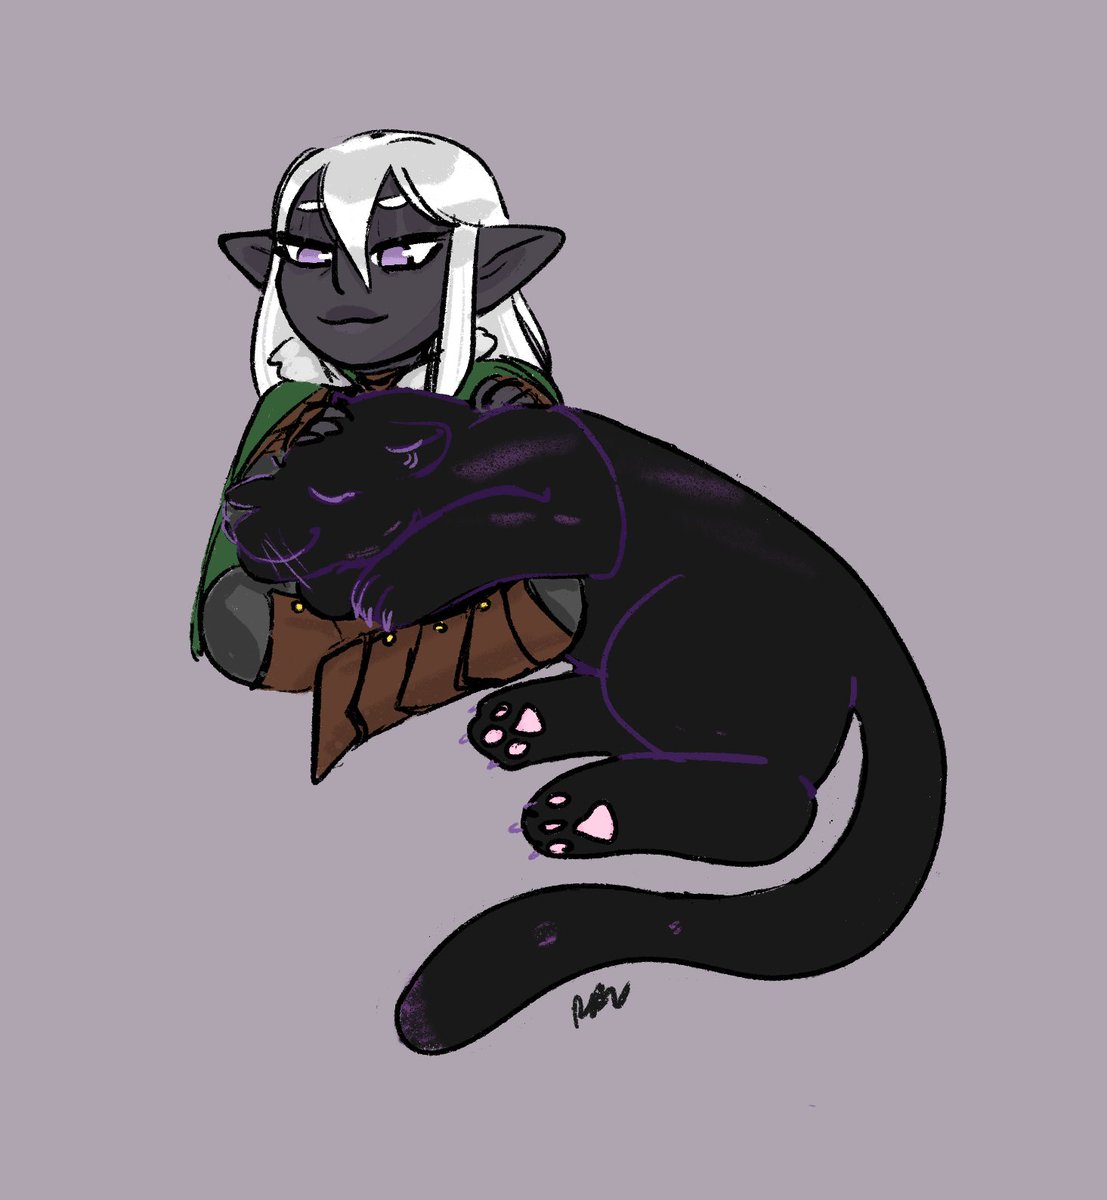 Woe, quick Drizzt and Guen doodle be upon ye 

#legendofdrizzt #drizzt #drizztdourden